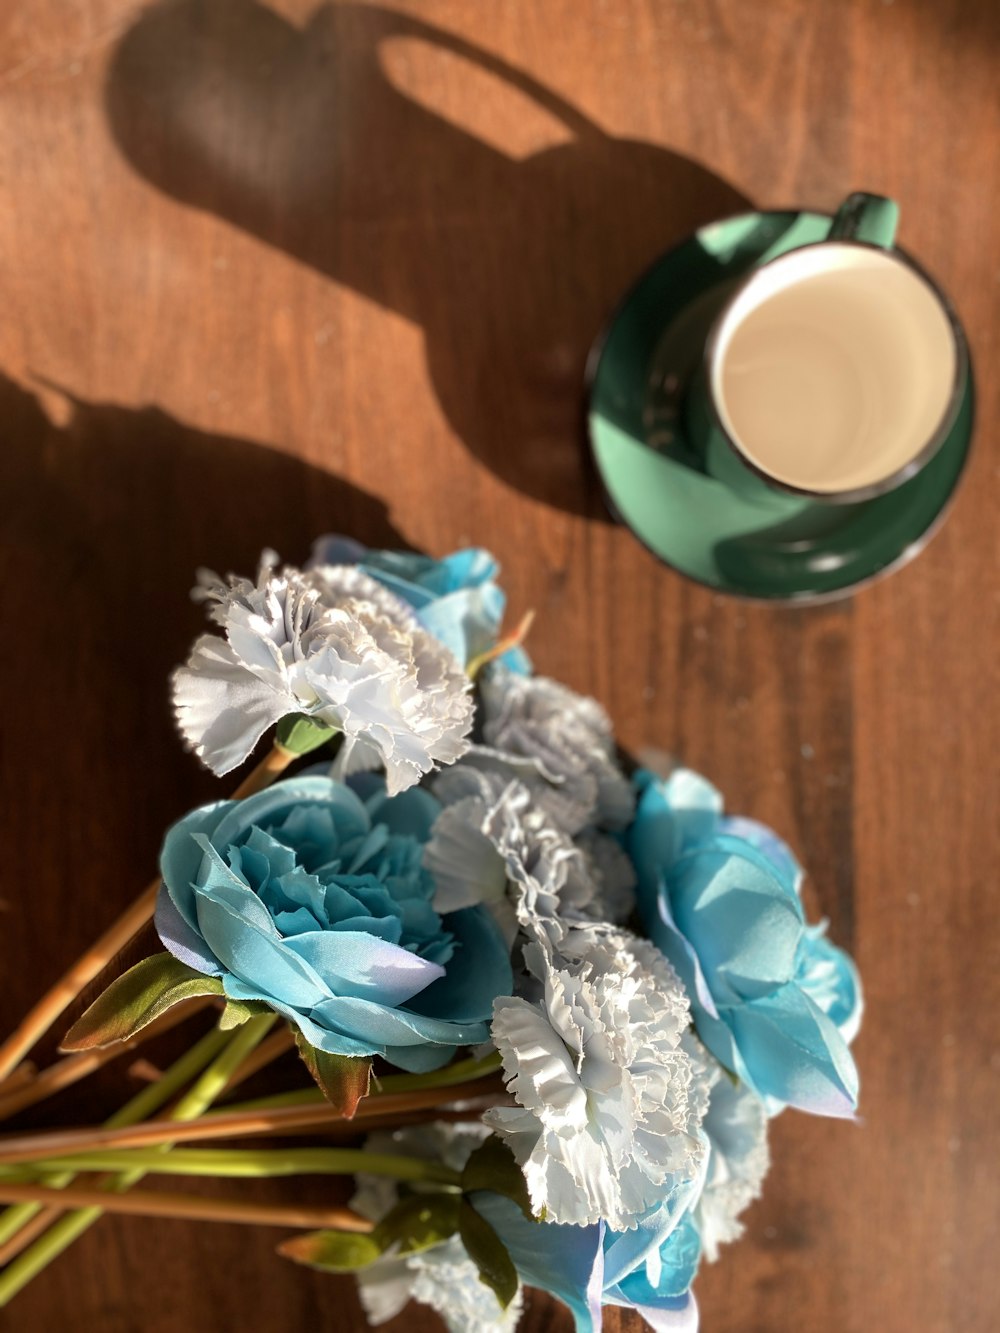 blue and white flower bouquet beside green ceramic mug on brown wooden table